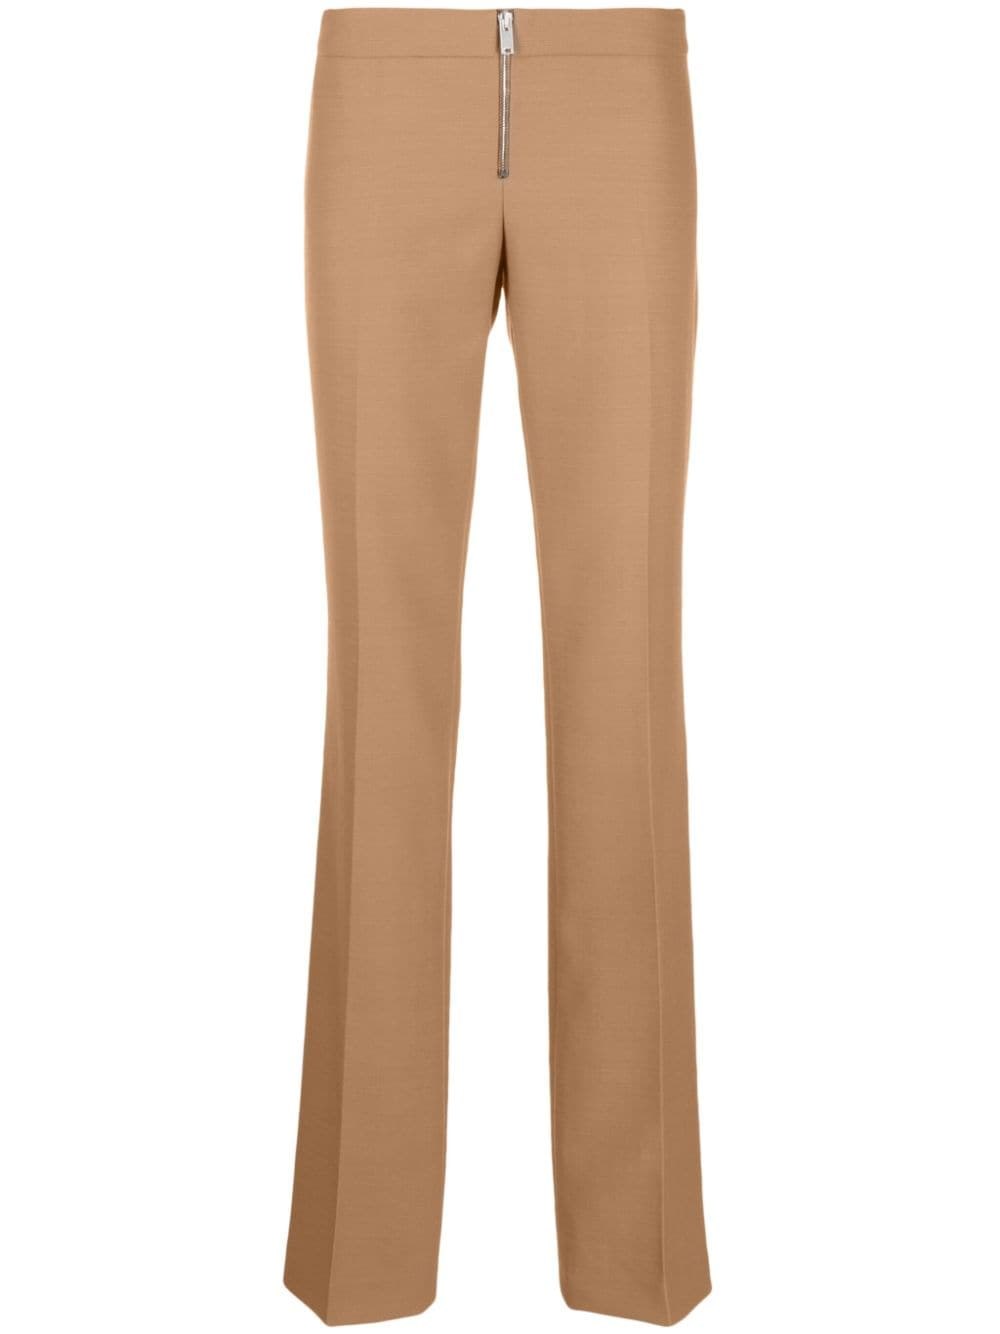 stella mccartney Slim-fit trousers with zip available on 31389 - US